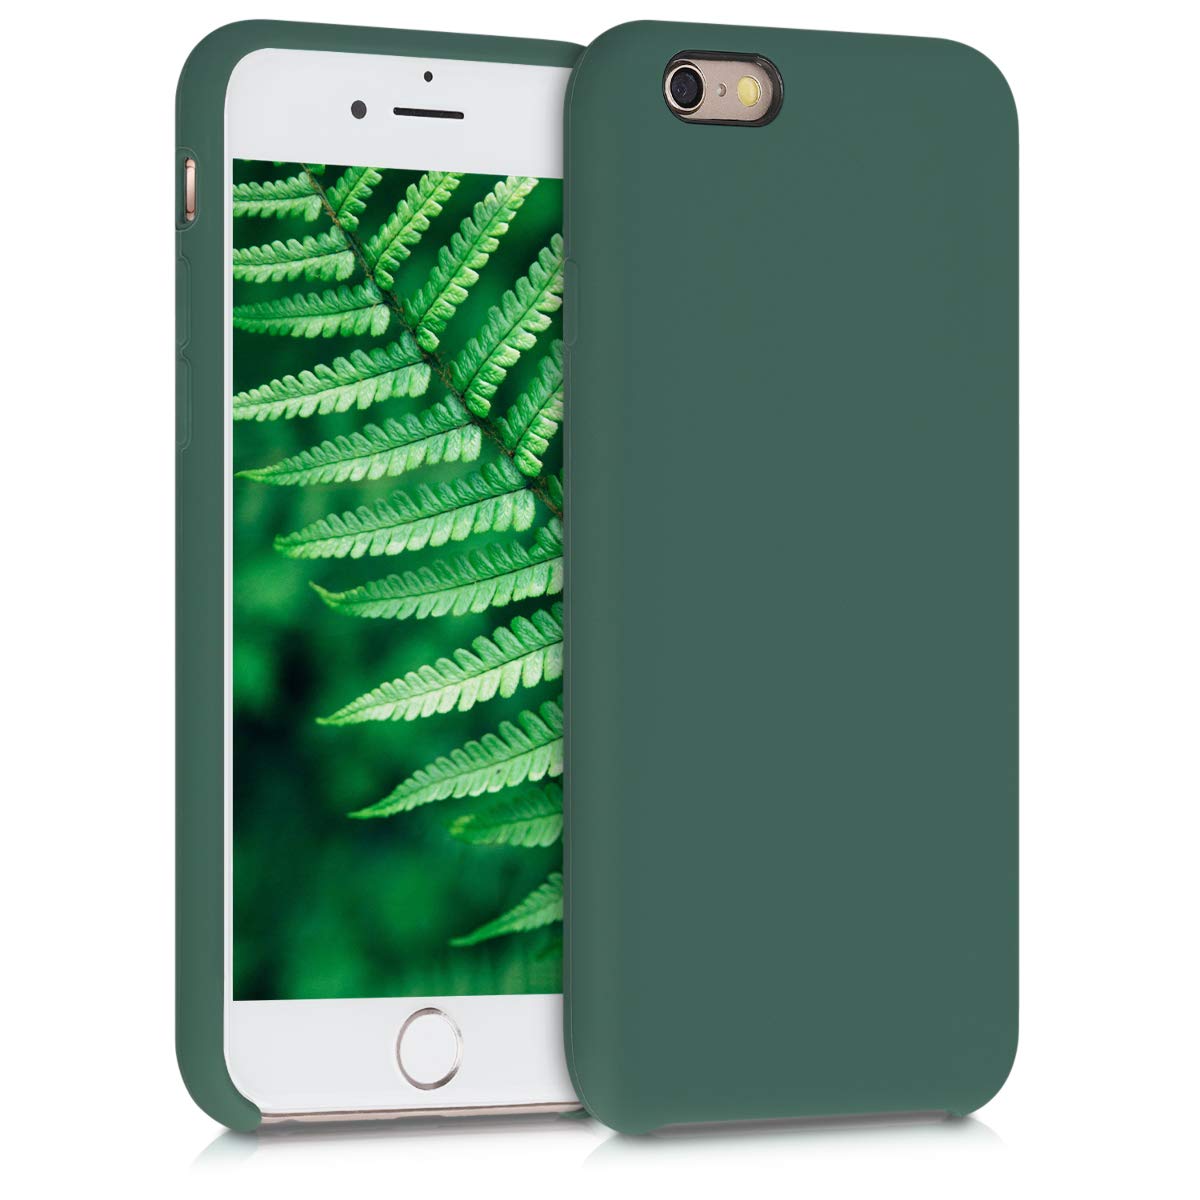 Cases For iPhone 6S saynama